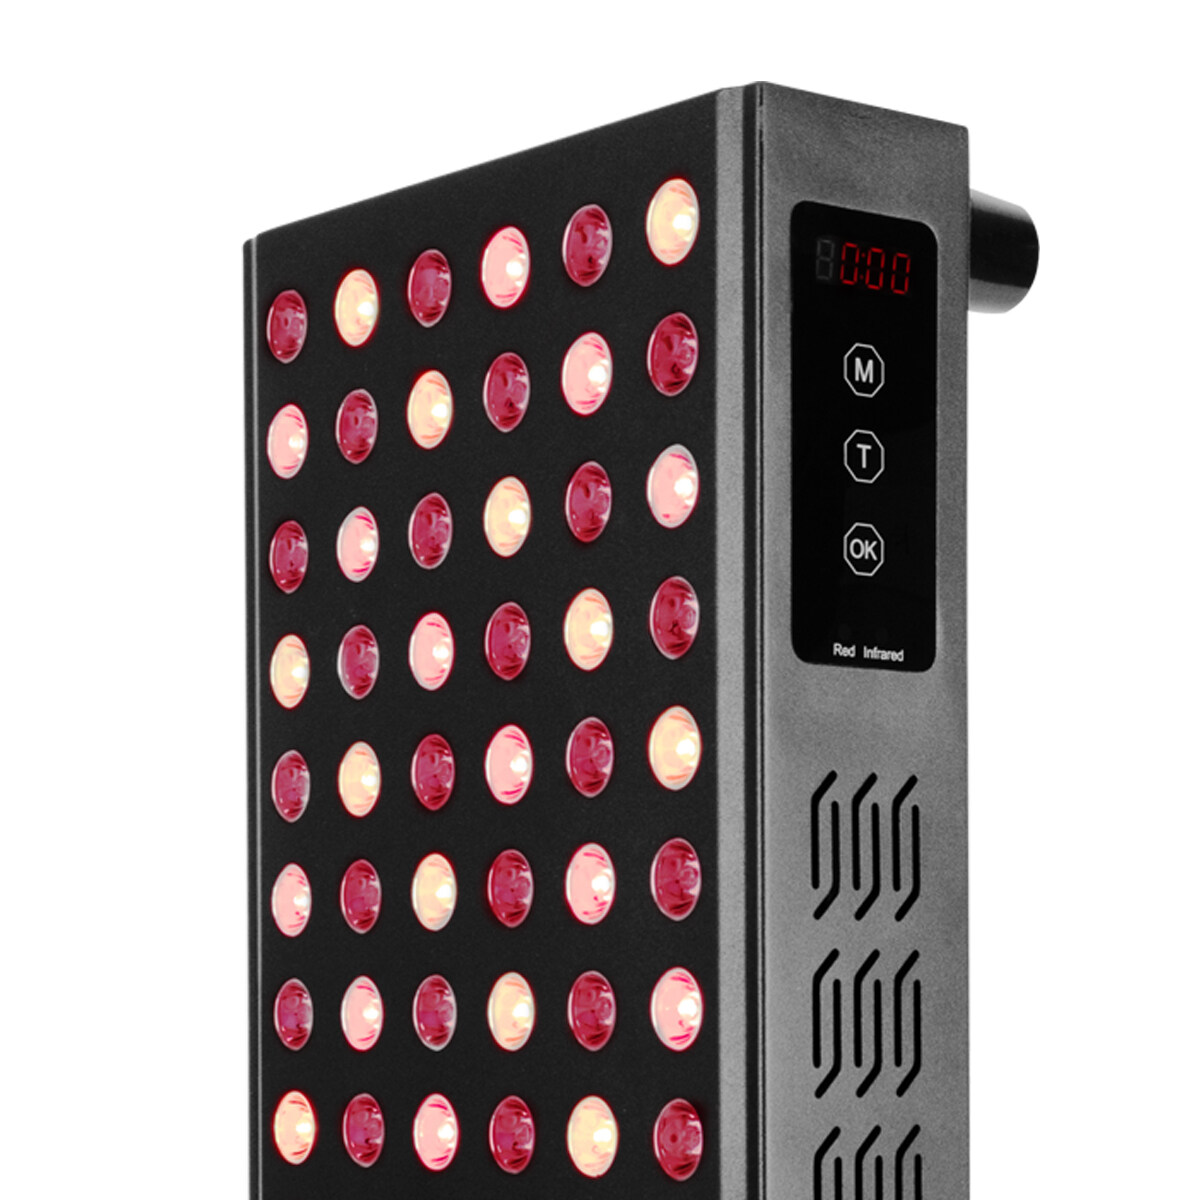 red light skin therapy at home, red light therapy and skin, red light skin rejuvenation therapy, red light therapy crepey skin, skin red light therapy